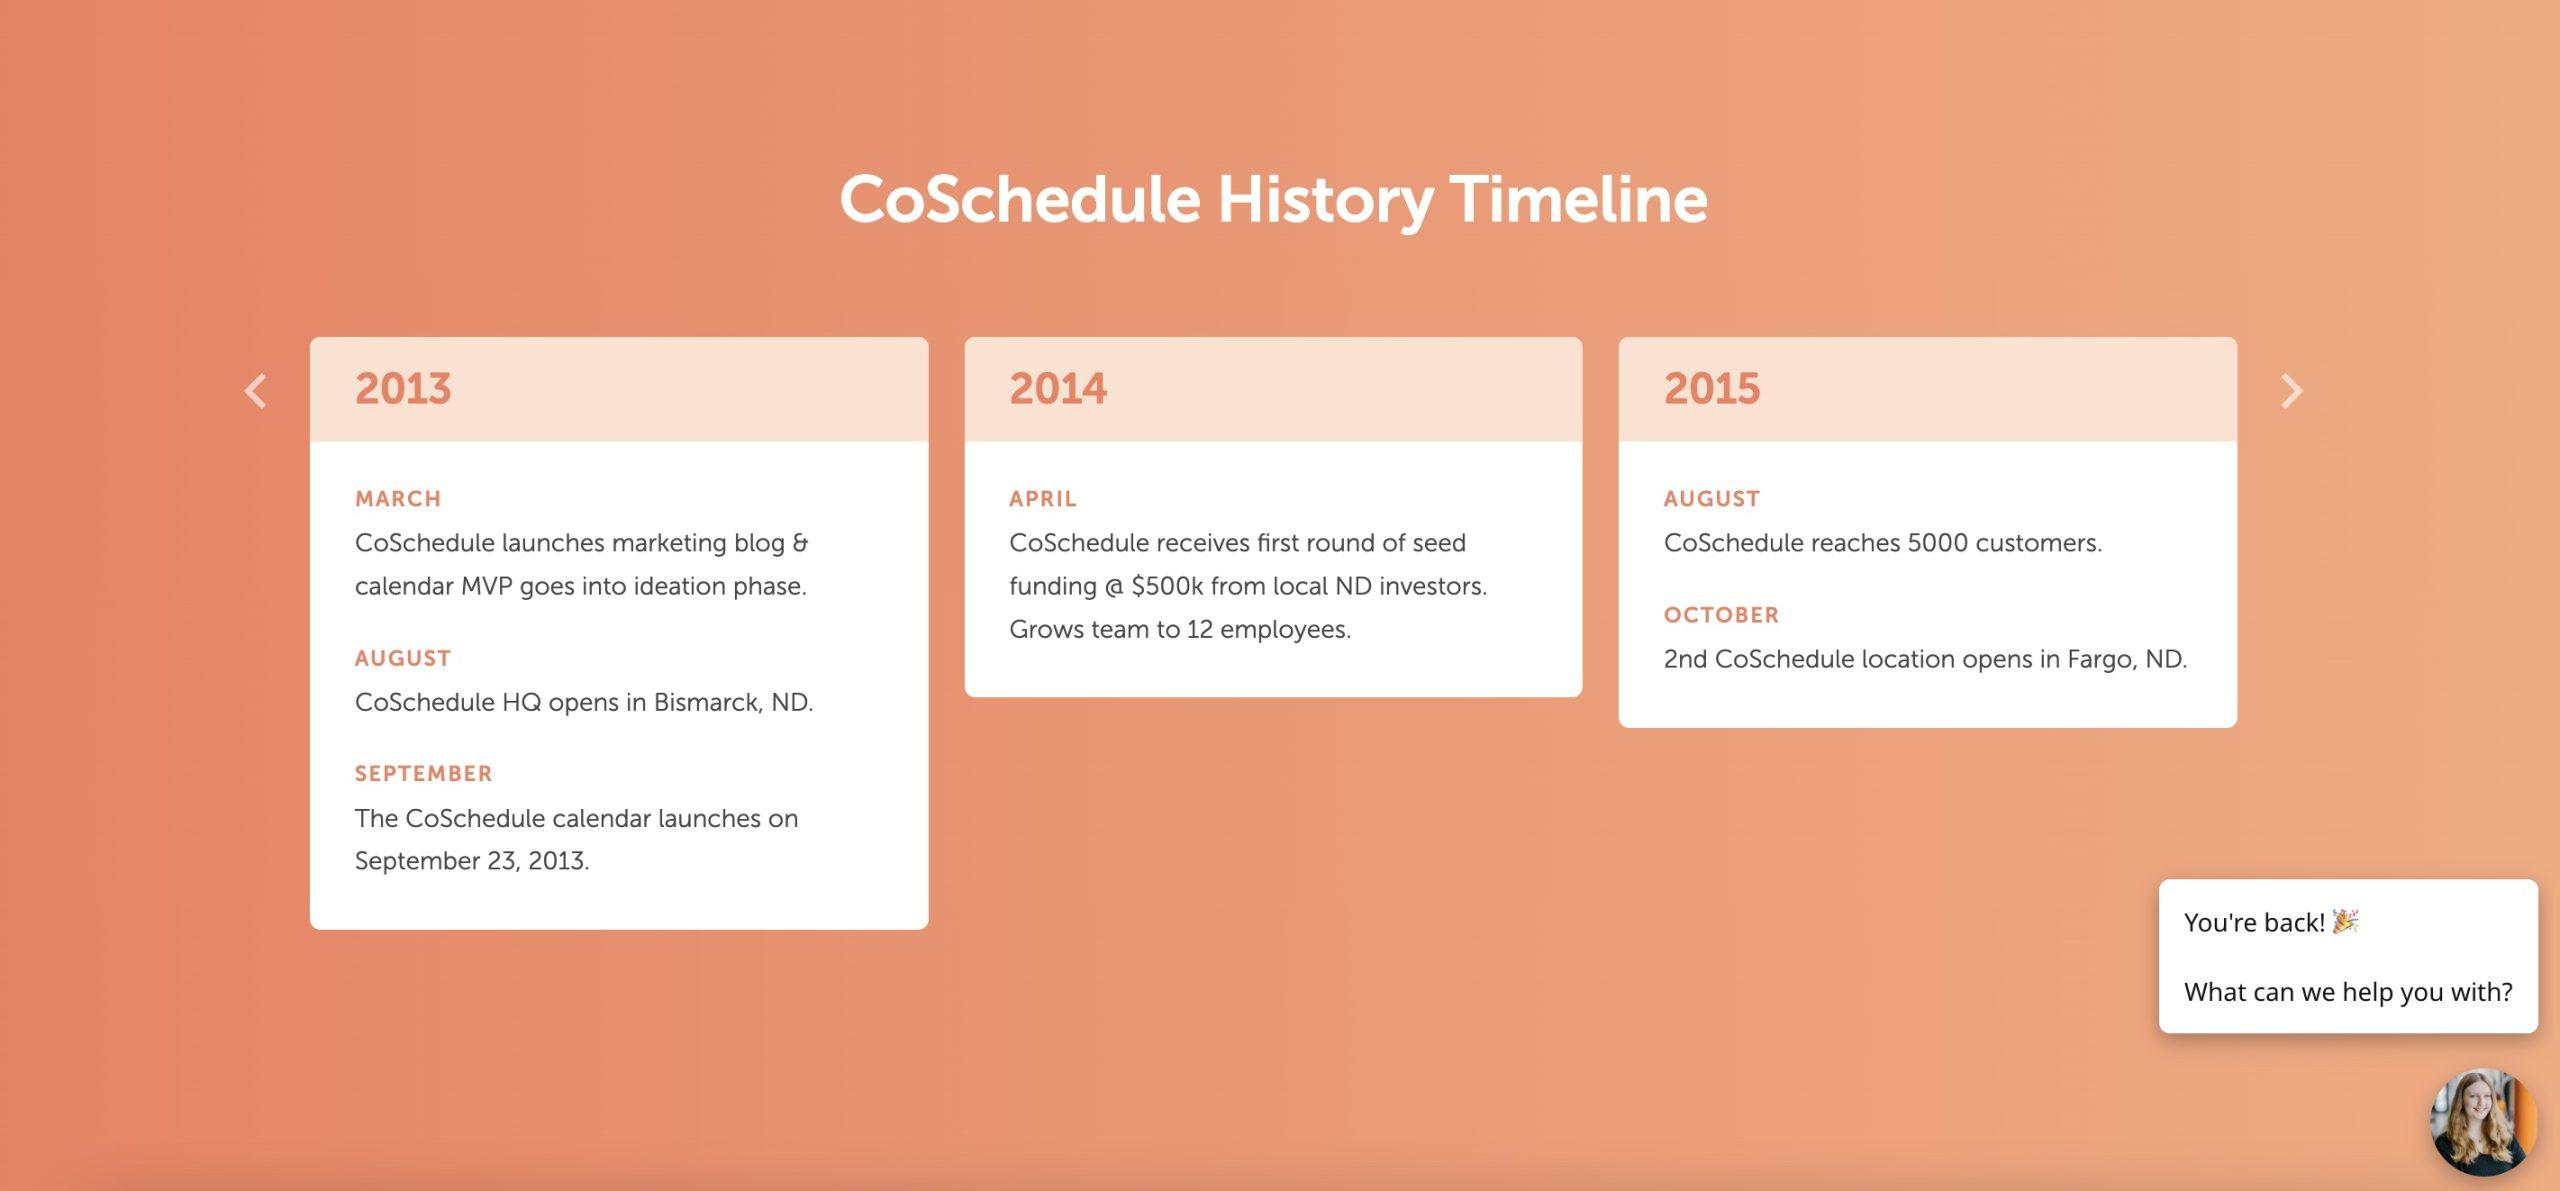 CoSchedule history timeline